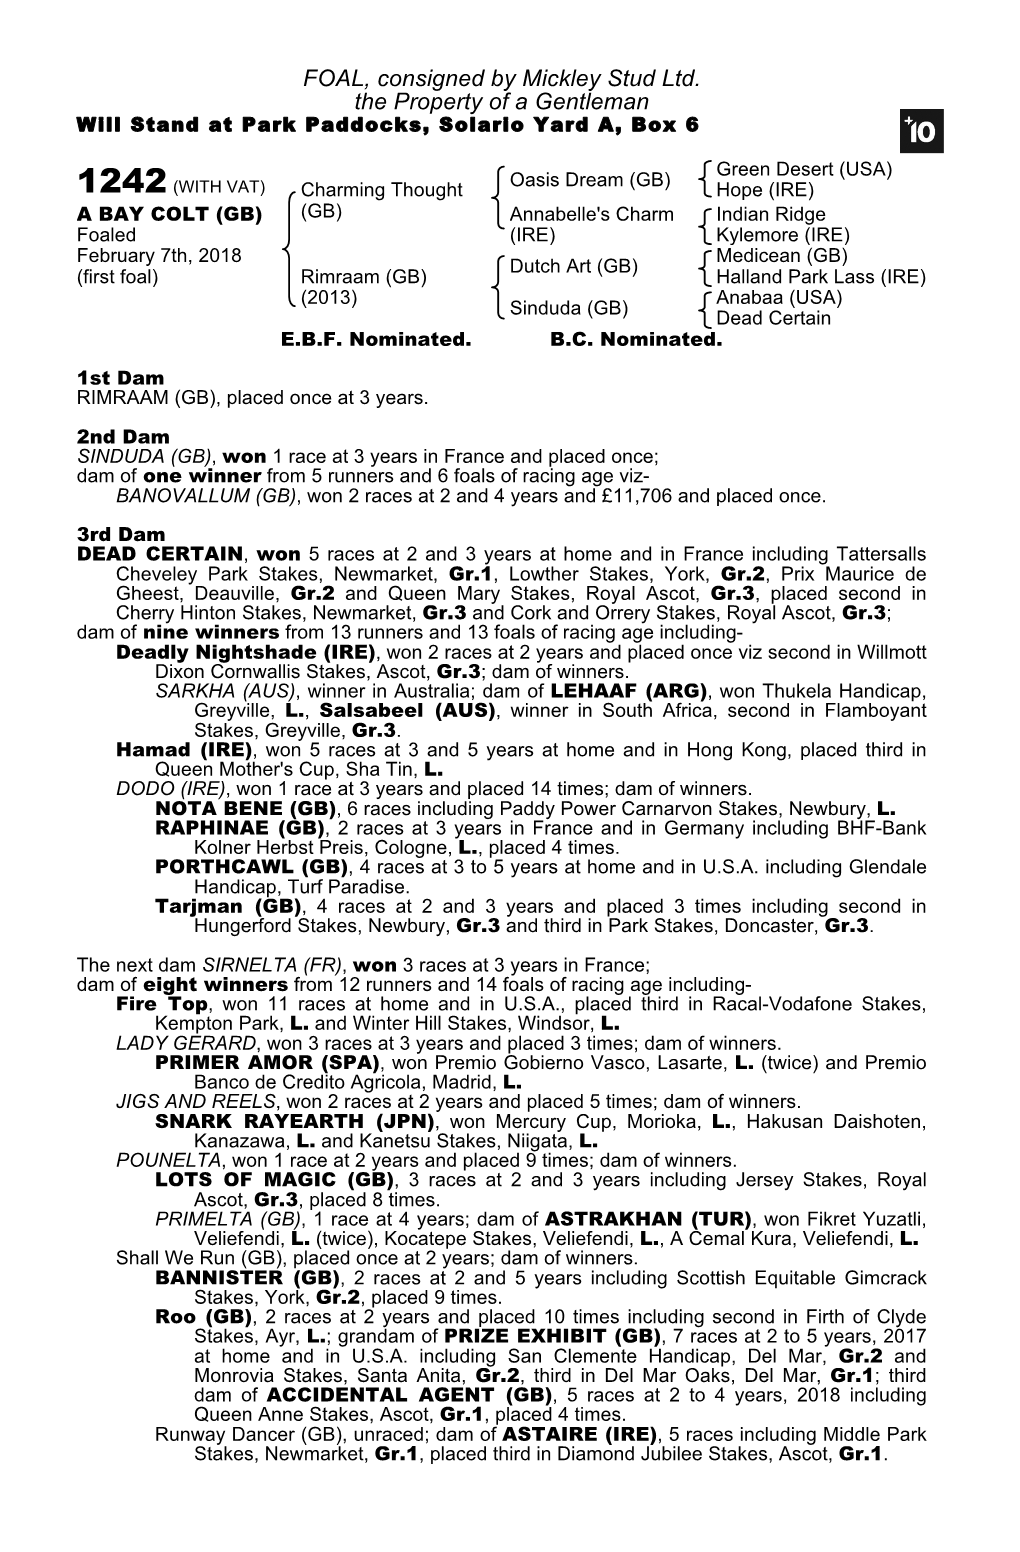 FOAL, Consigned by Mickley Stud Ltd. the Property of a Gentleman Will Stand at Park Paddocks, Solario Yard A, Box 6